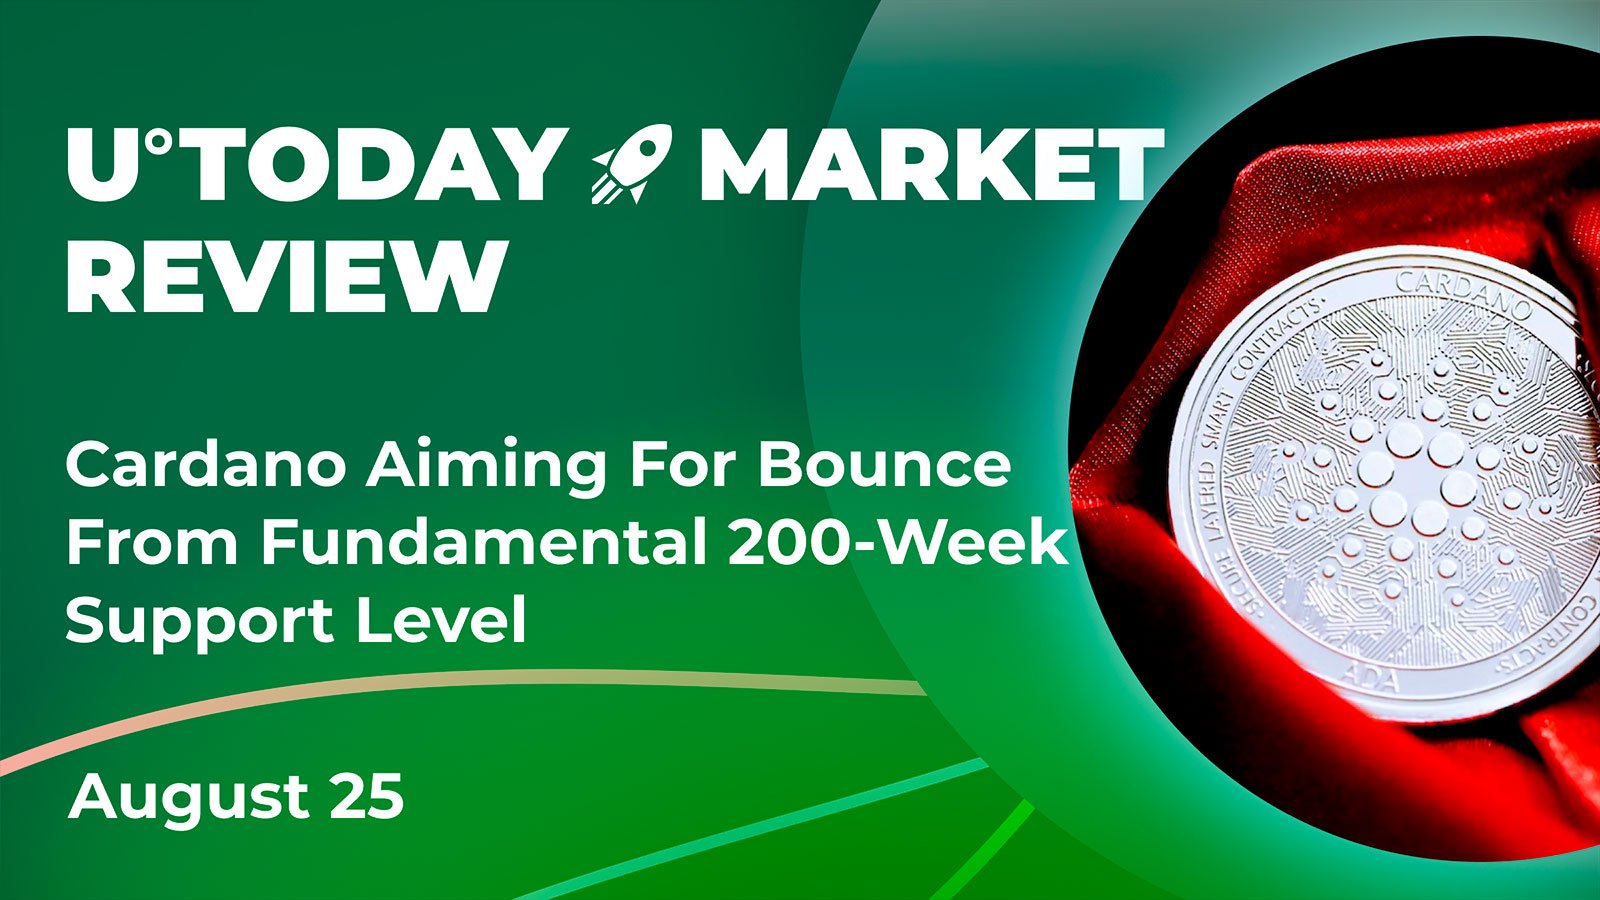 Cardano Aiming For Bounce From Fundamental 200-Week Support Level: Crypto Market Review, August 25